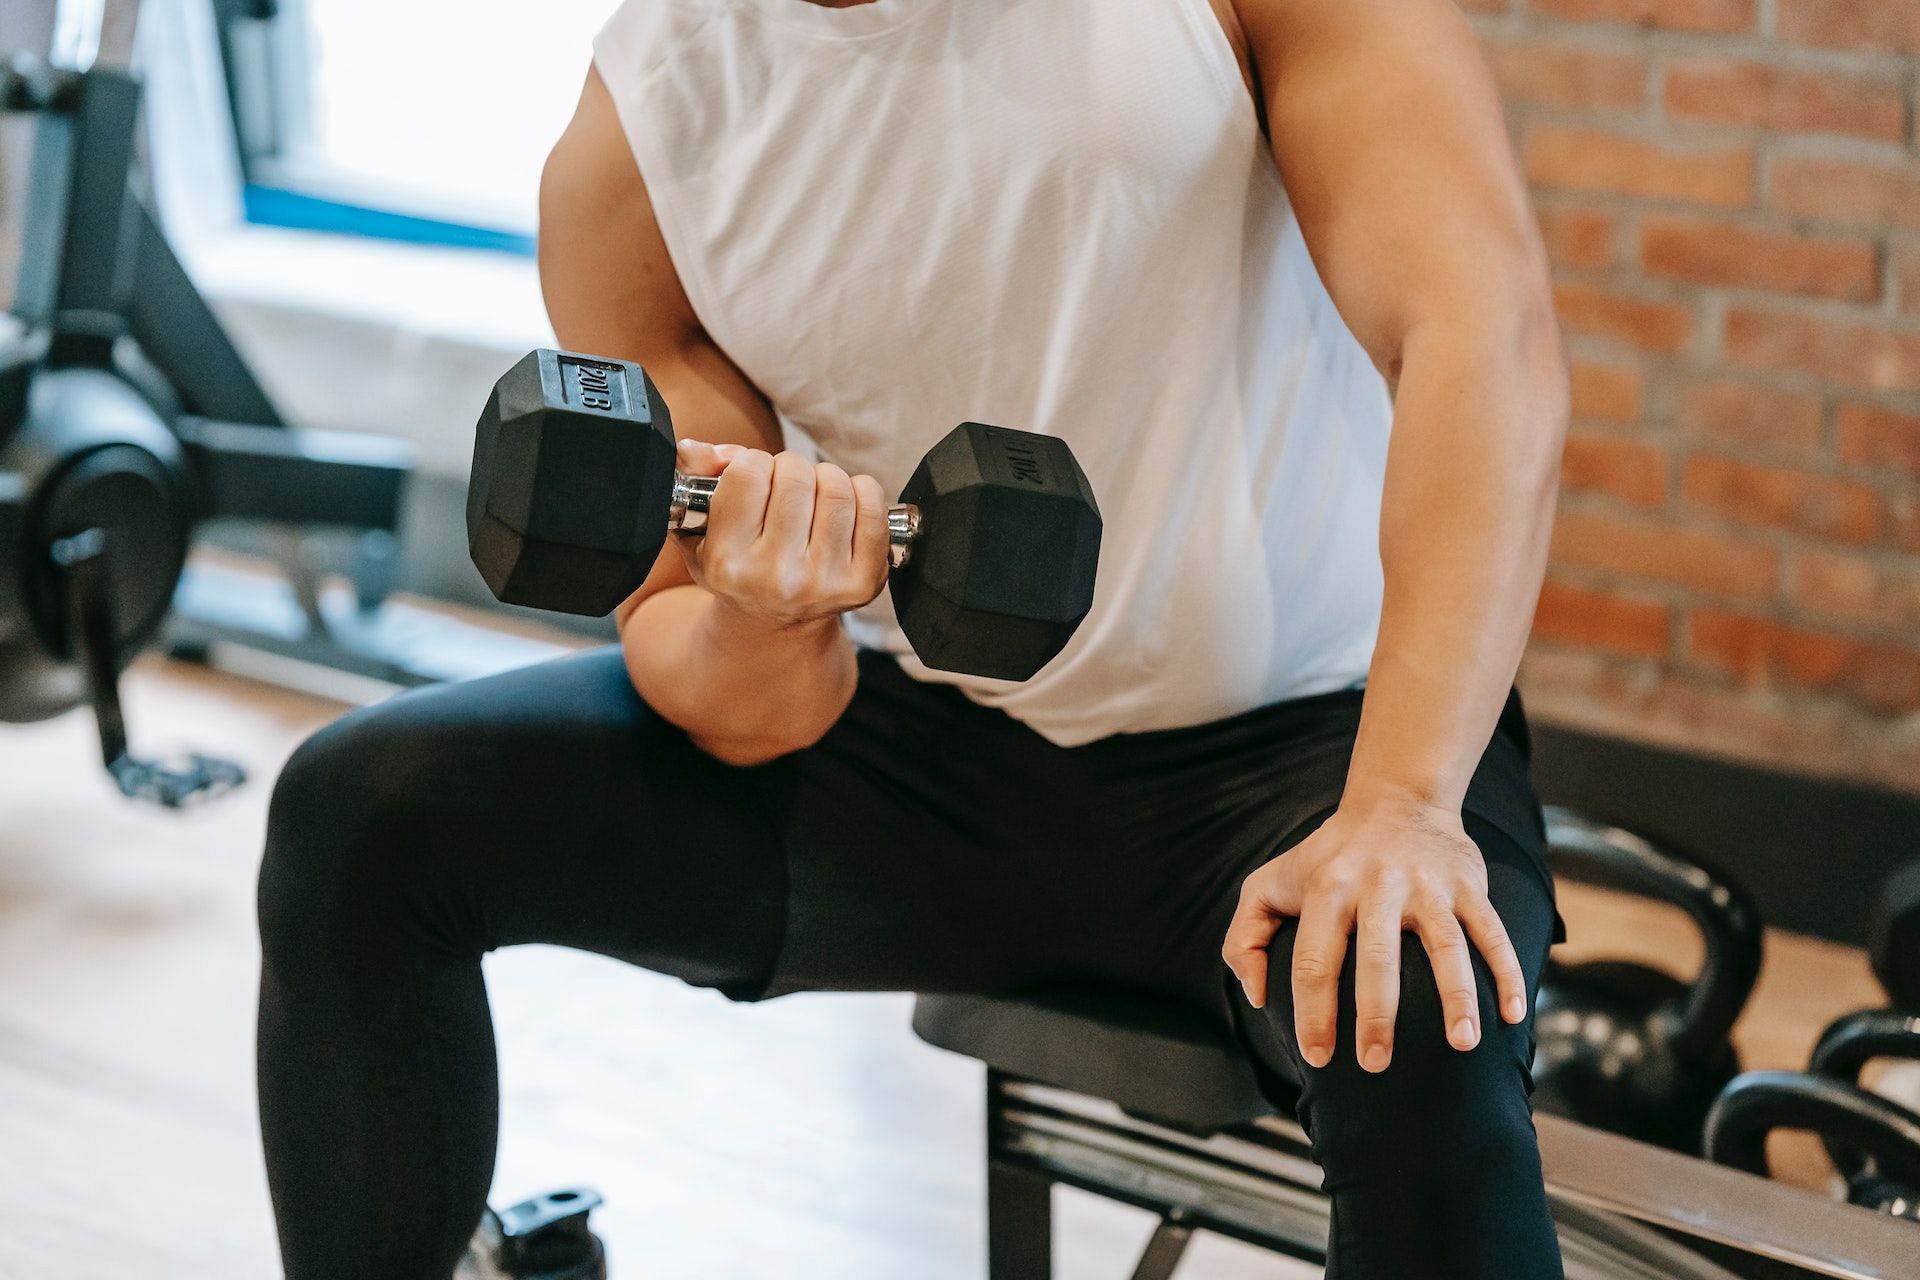 Weight lifting exercises can help burn arm fat and give your upper body a well-toned look. (Photo via Pexels/Andres  Ayrton)